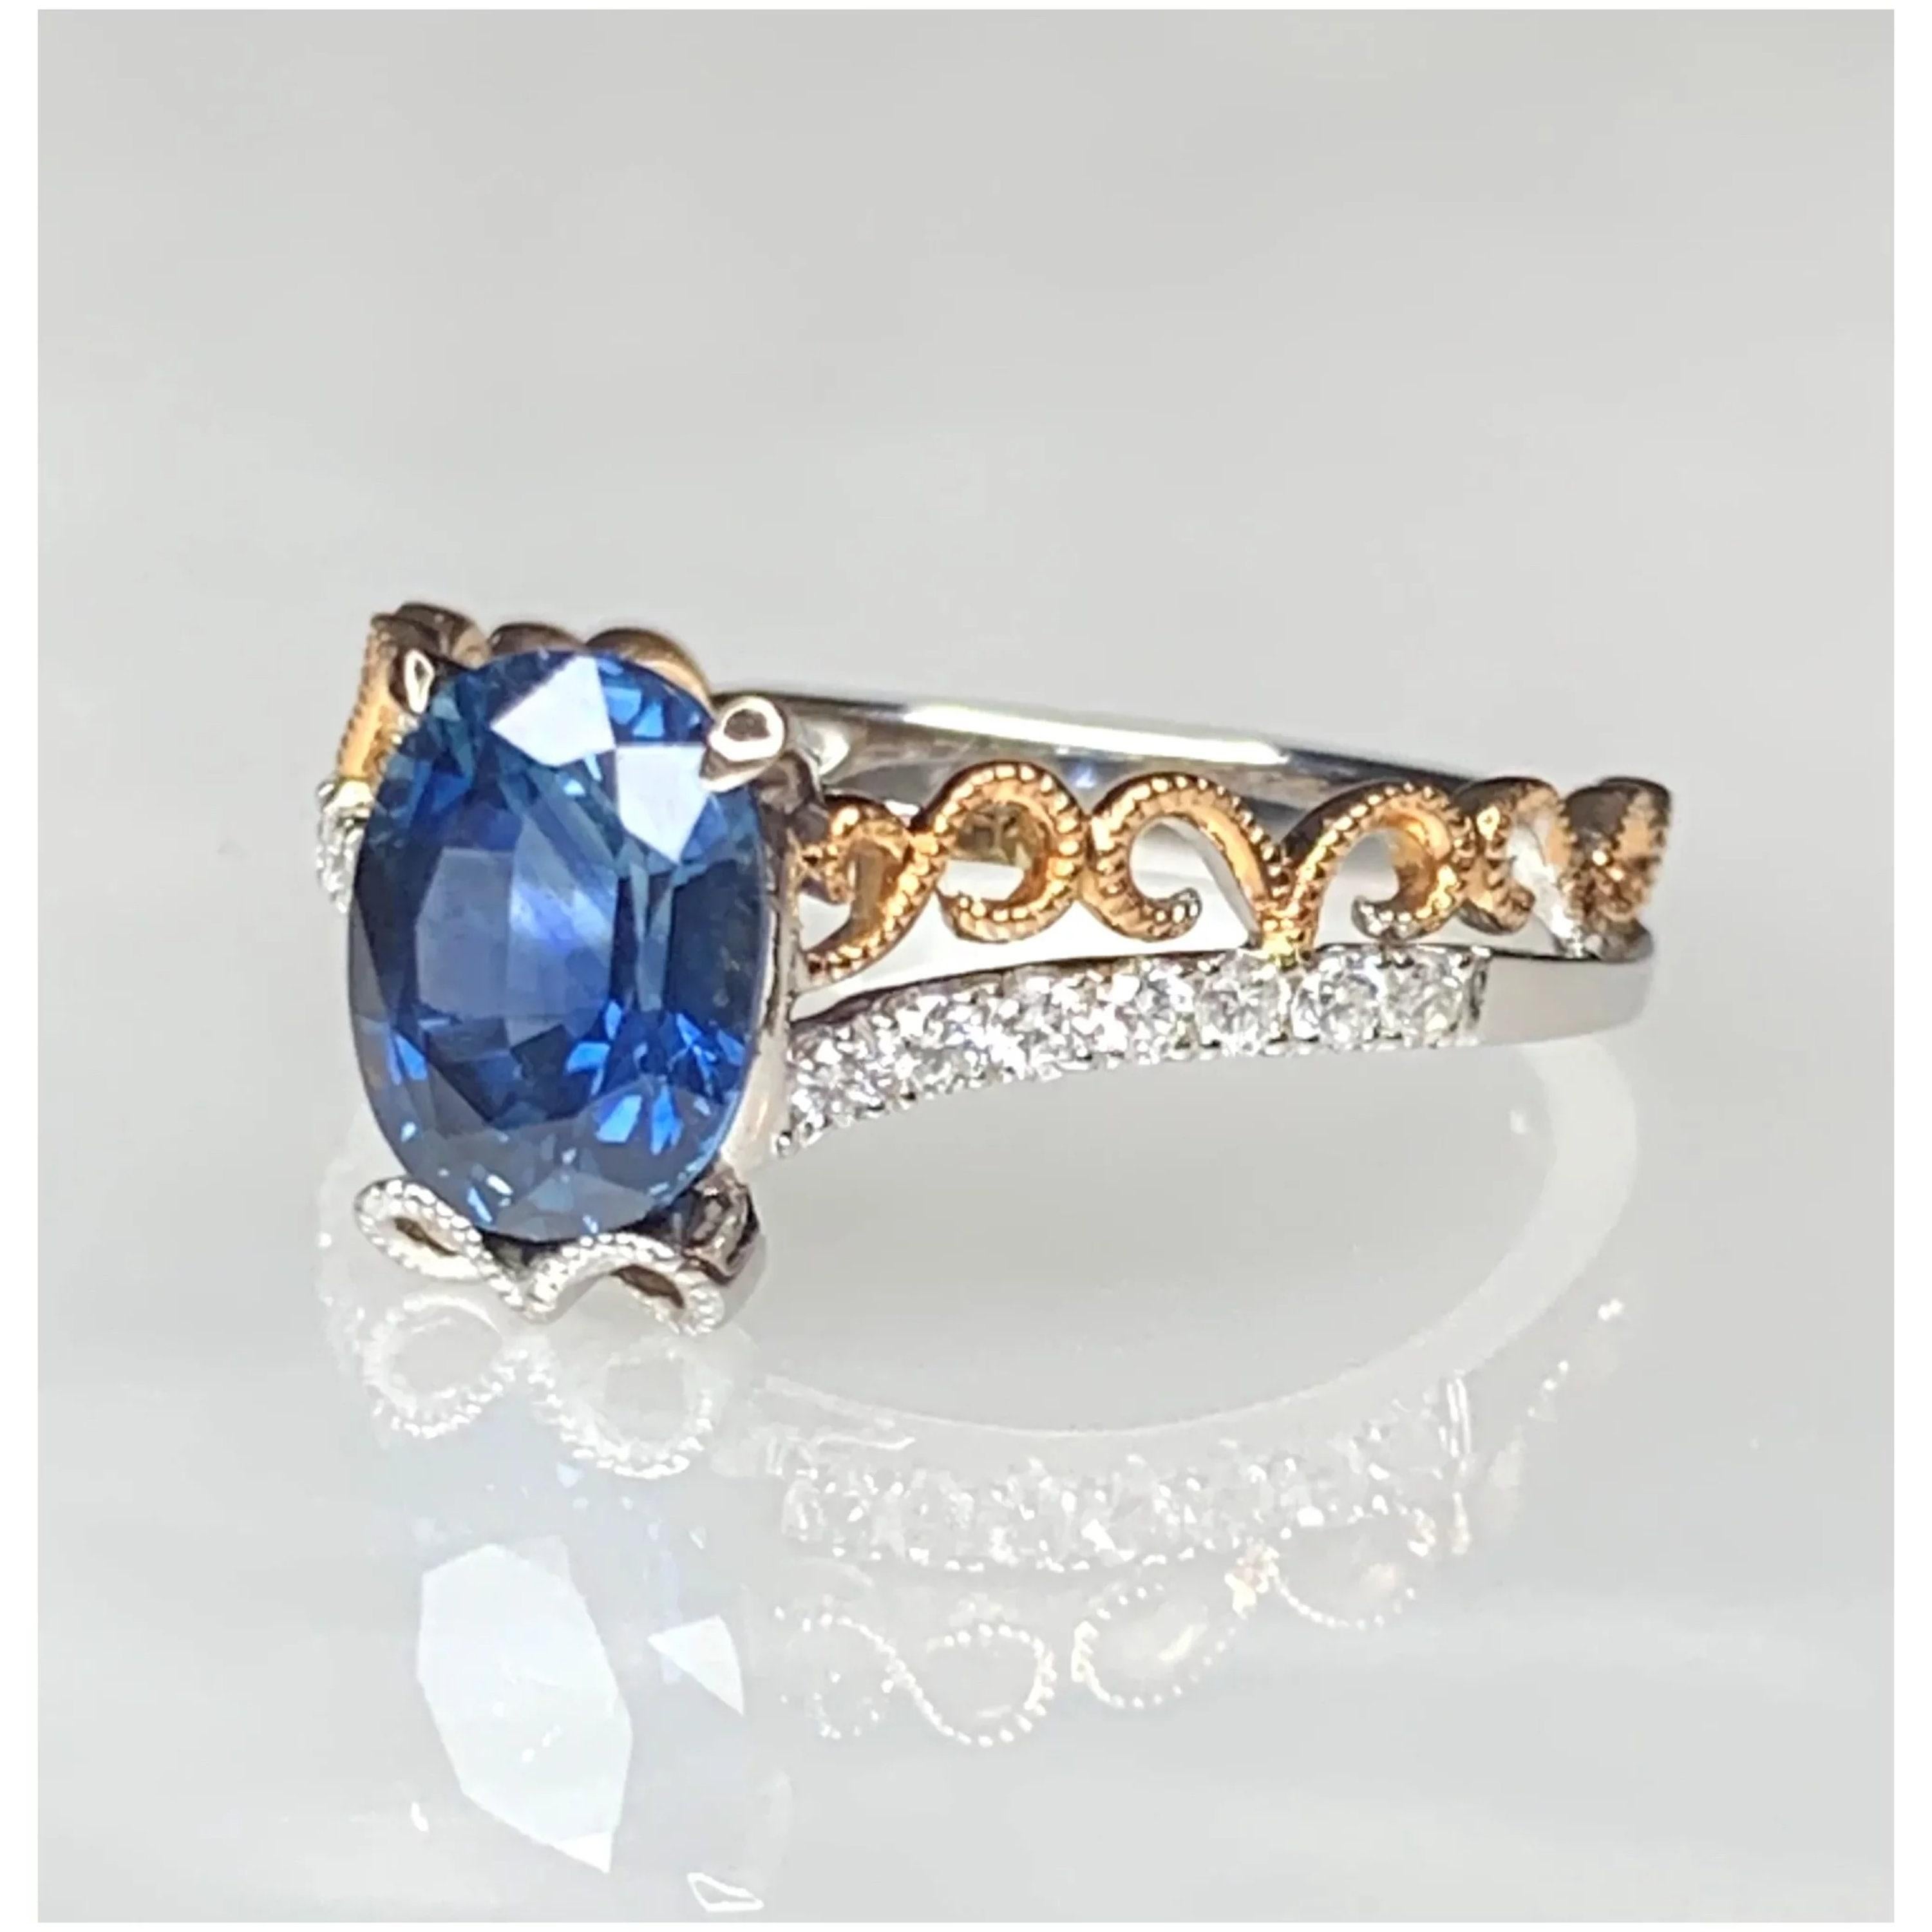 For Sale:  Oval Cut Blue Sapphire Diamond Engagement Ring Art Deco Sapphire Bridal Ring  2